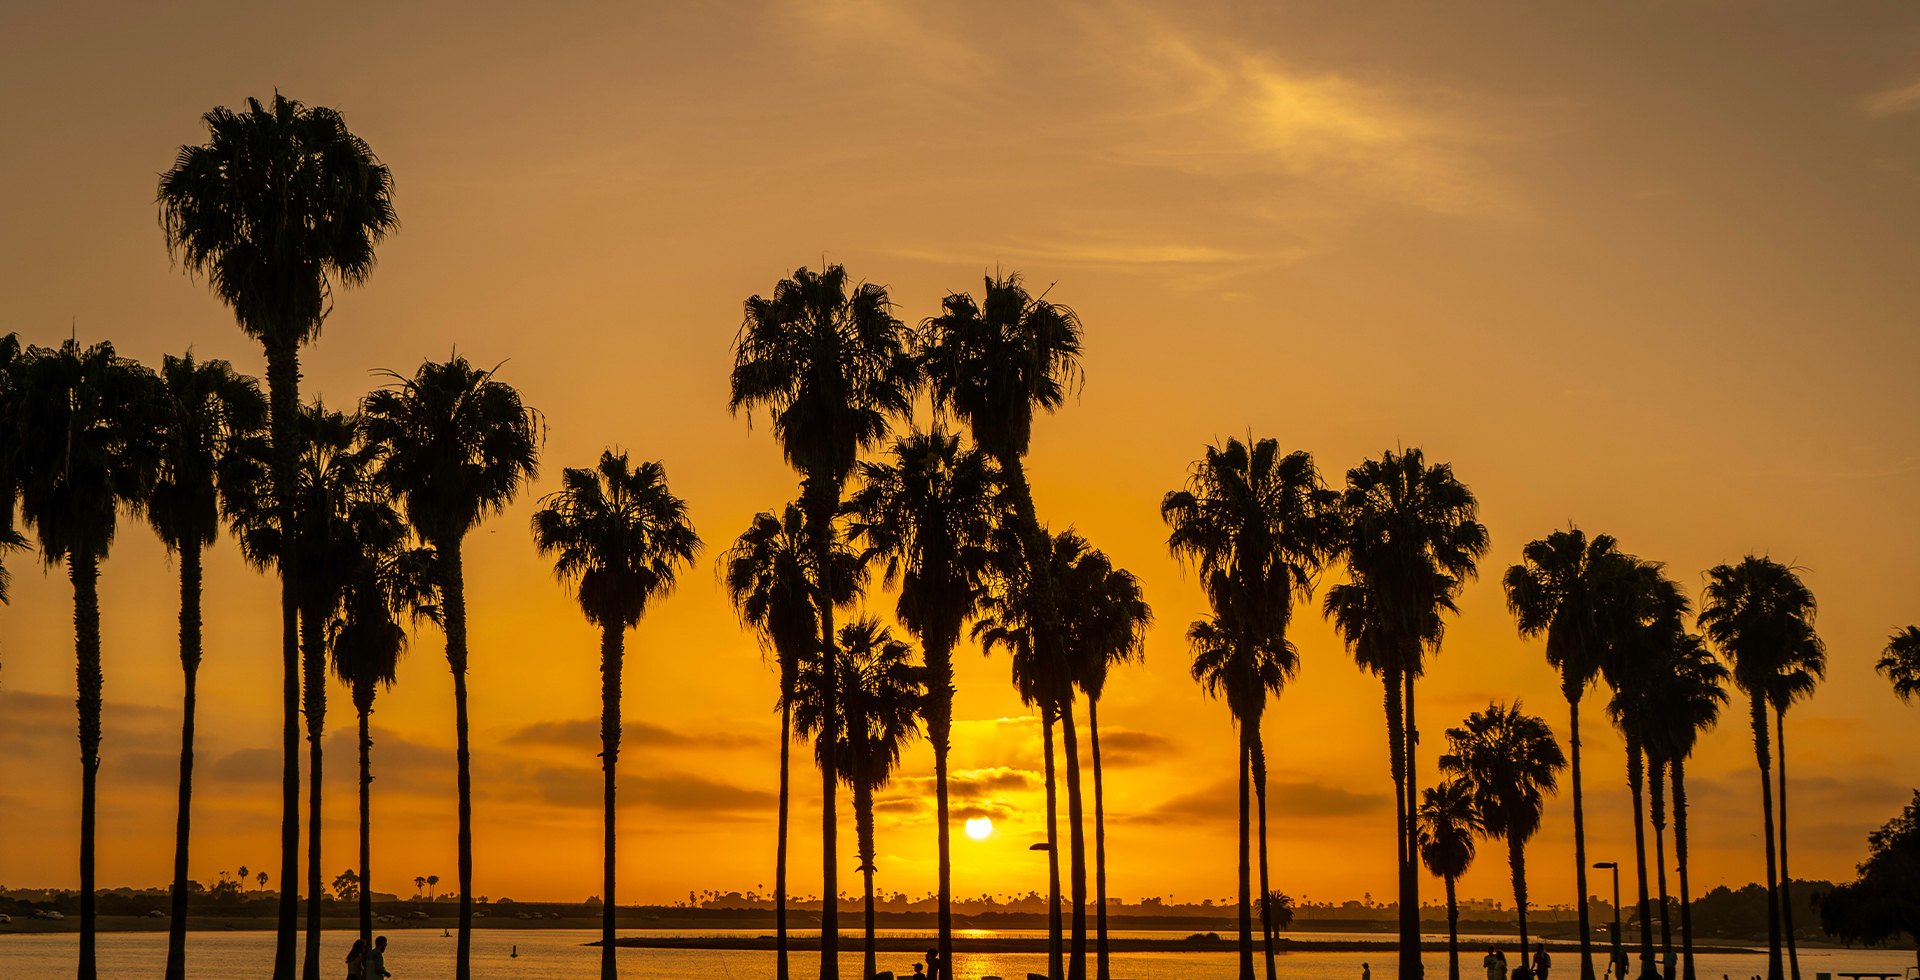 Silhouettes of palm trees in front of a San Diego sunset